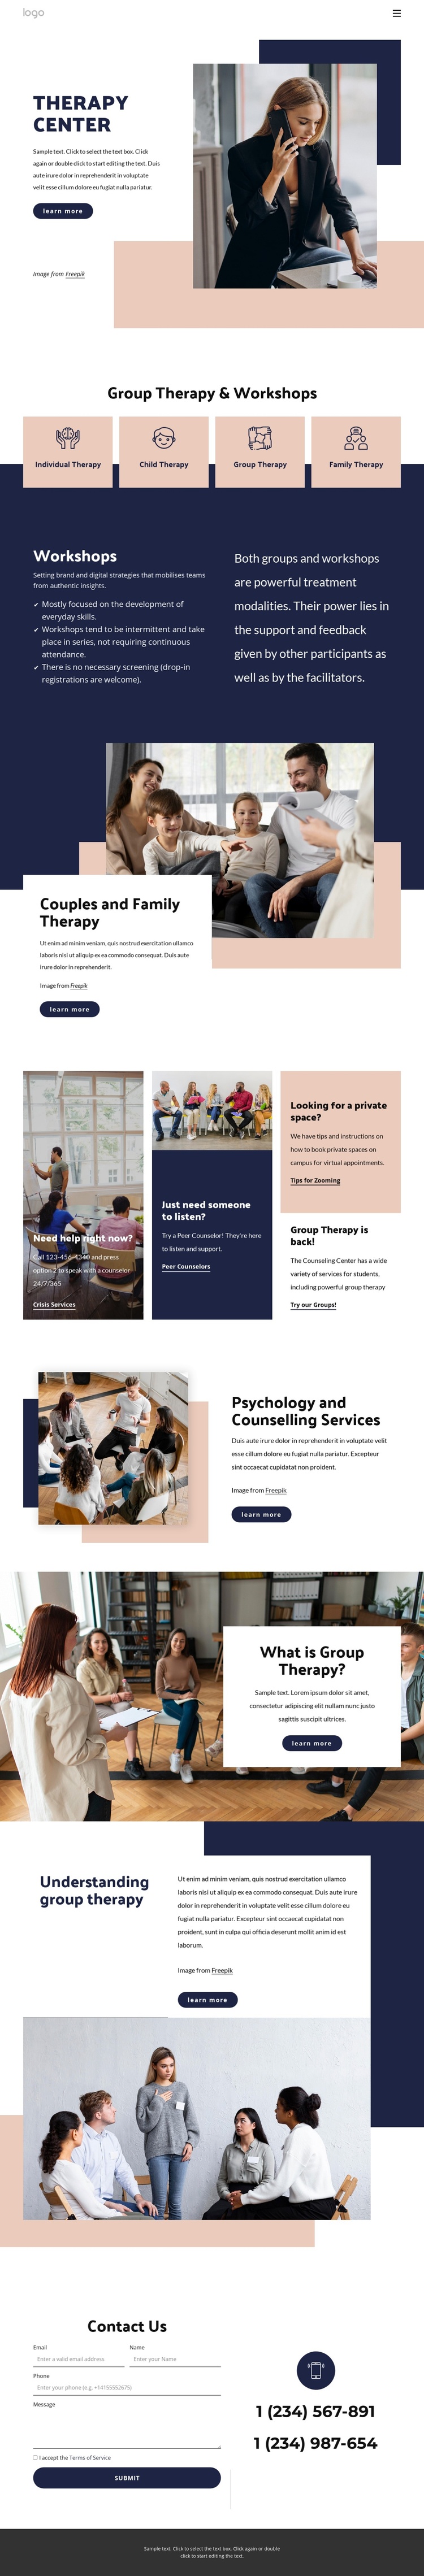 Therapy center Joomla Template